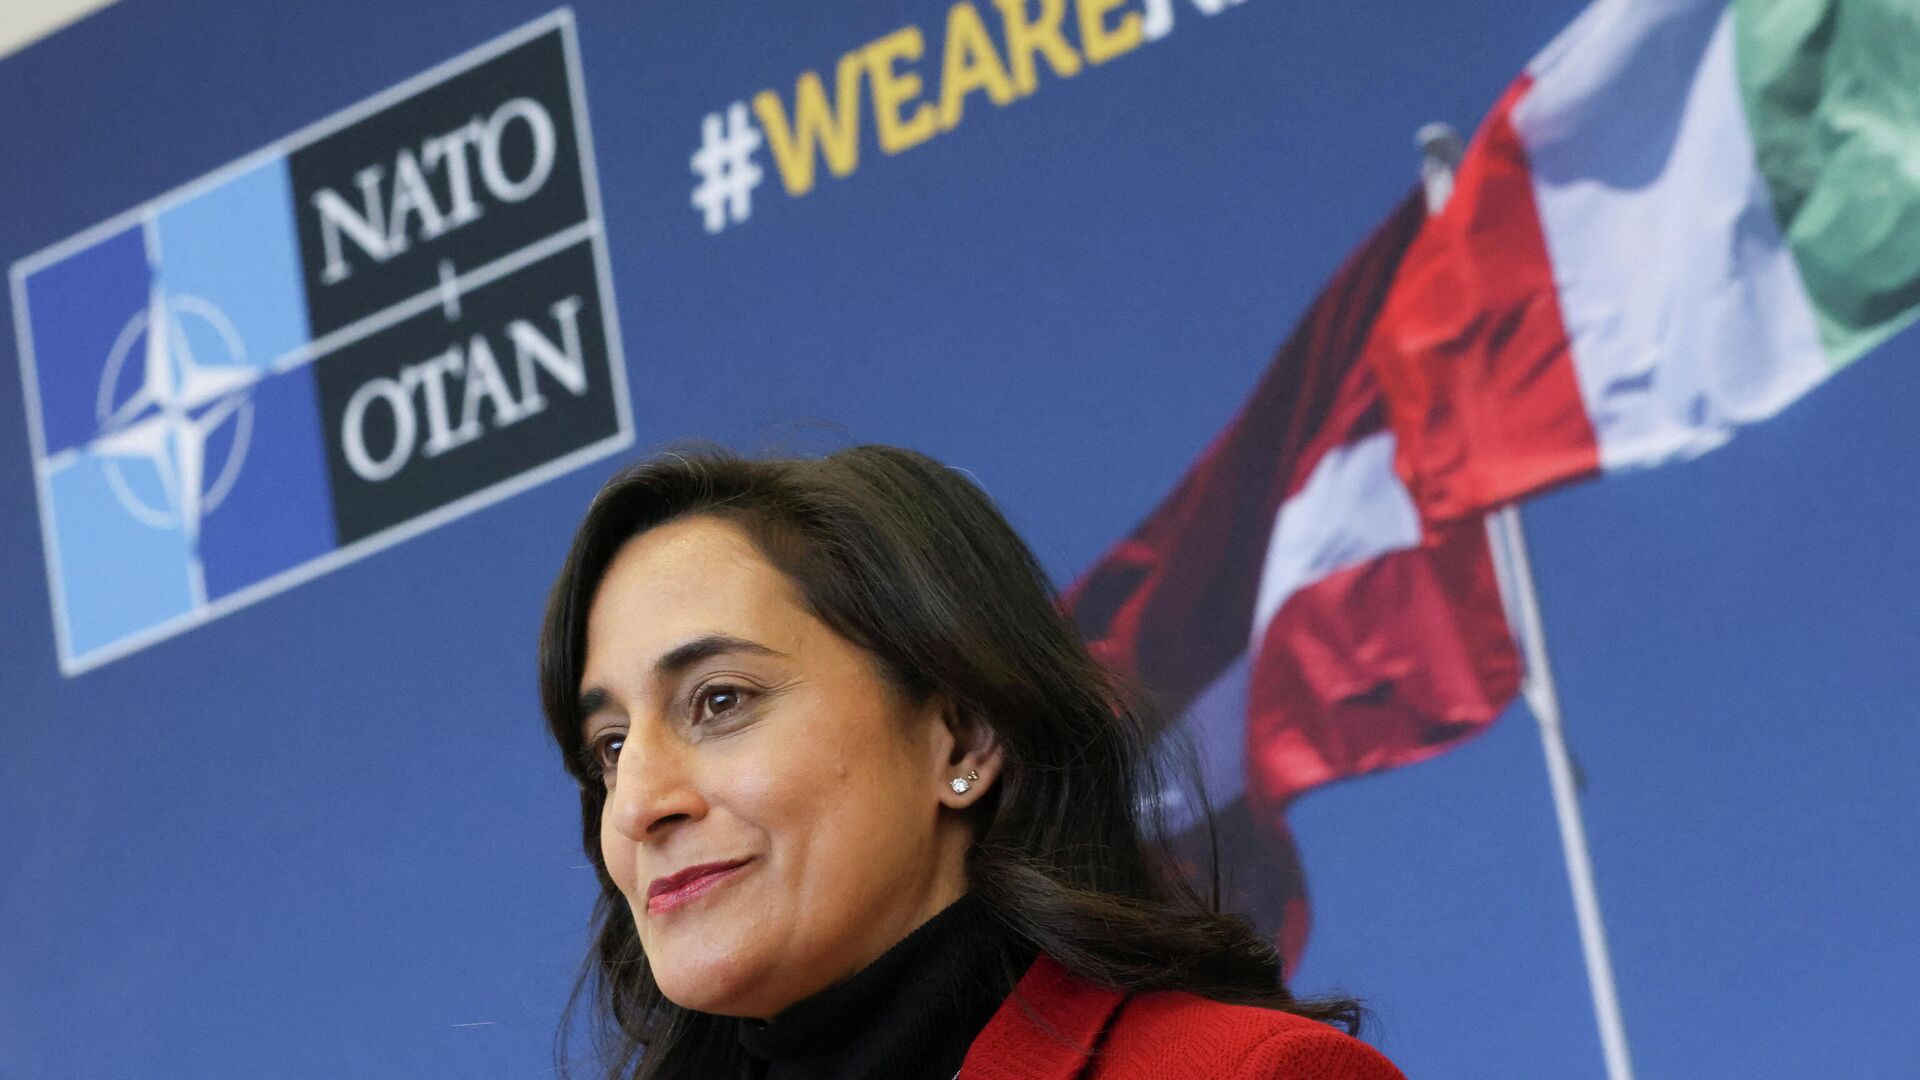 Canadian Defence Minister Anita Anand gives news briefing after meeting NATO Secretary General Jens Stoltenberg in Brussels, Belgium February 1, 2022. REUTERS/Yves Herman - Sputnik International, 1920, 01.02.2022